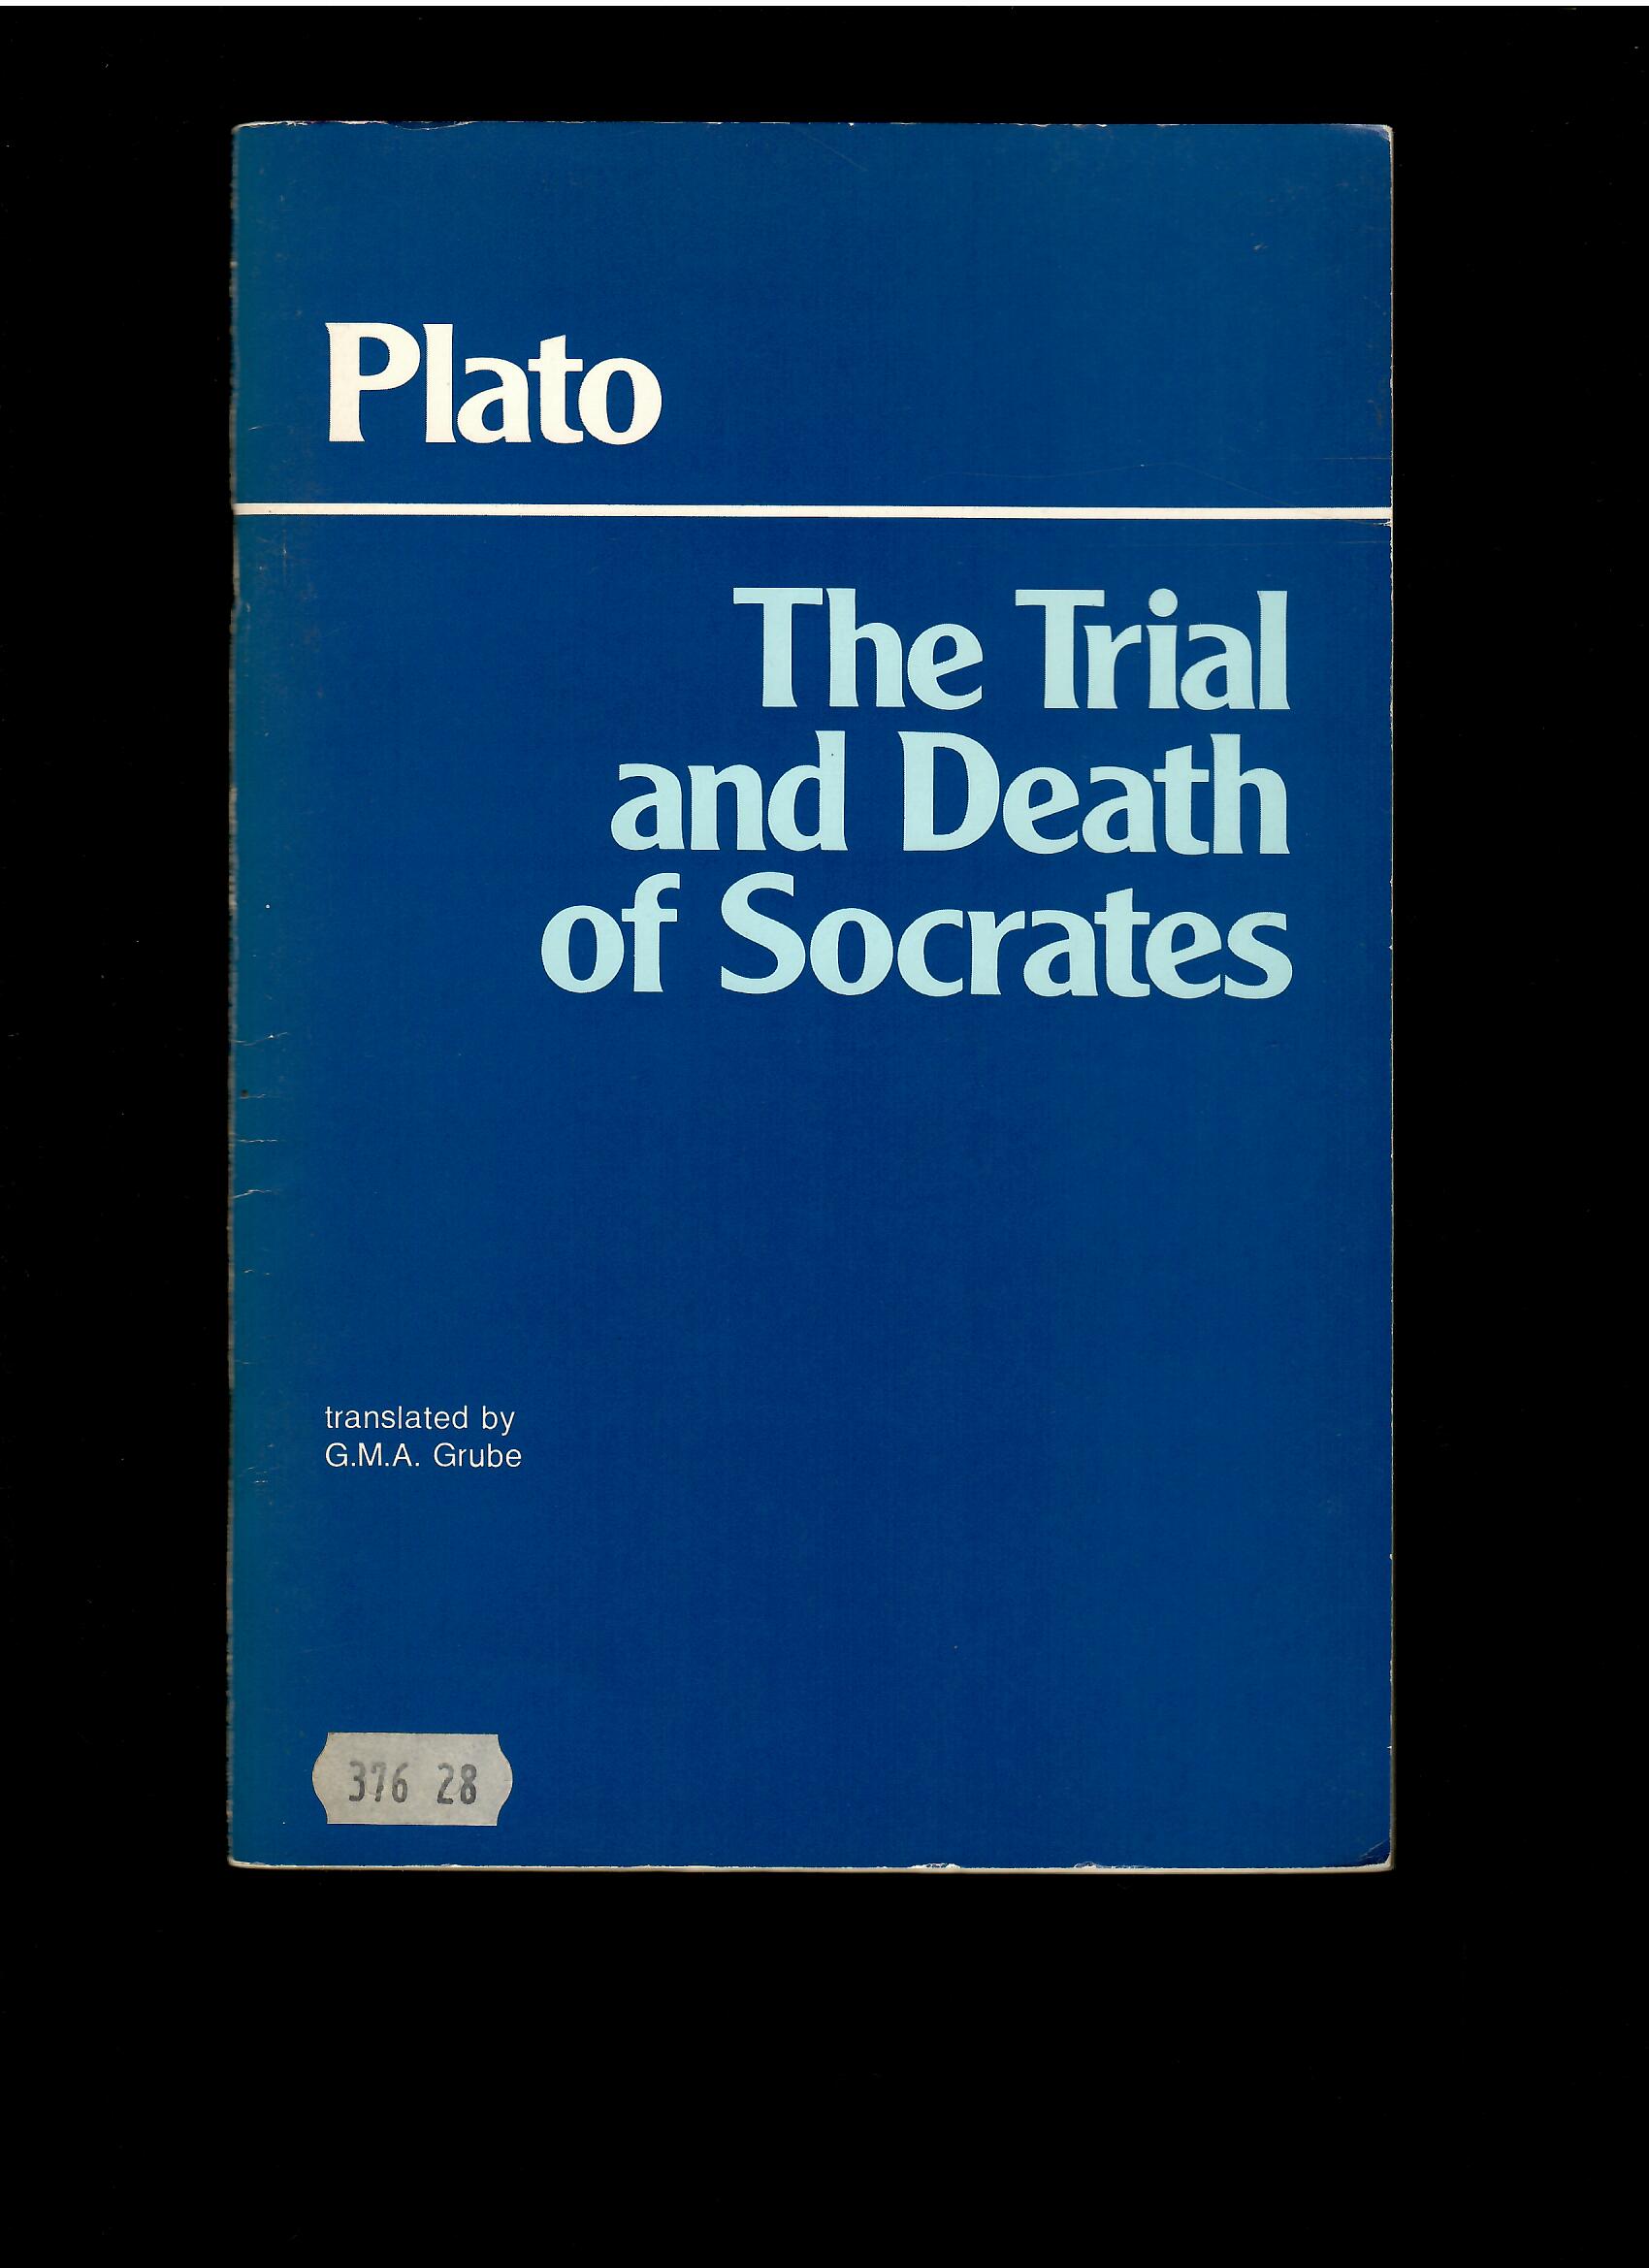 Plato: The Trial and Death of Socrates